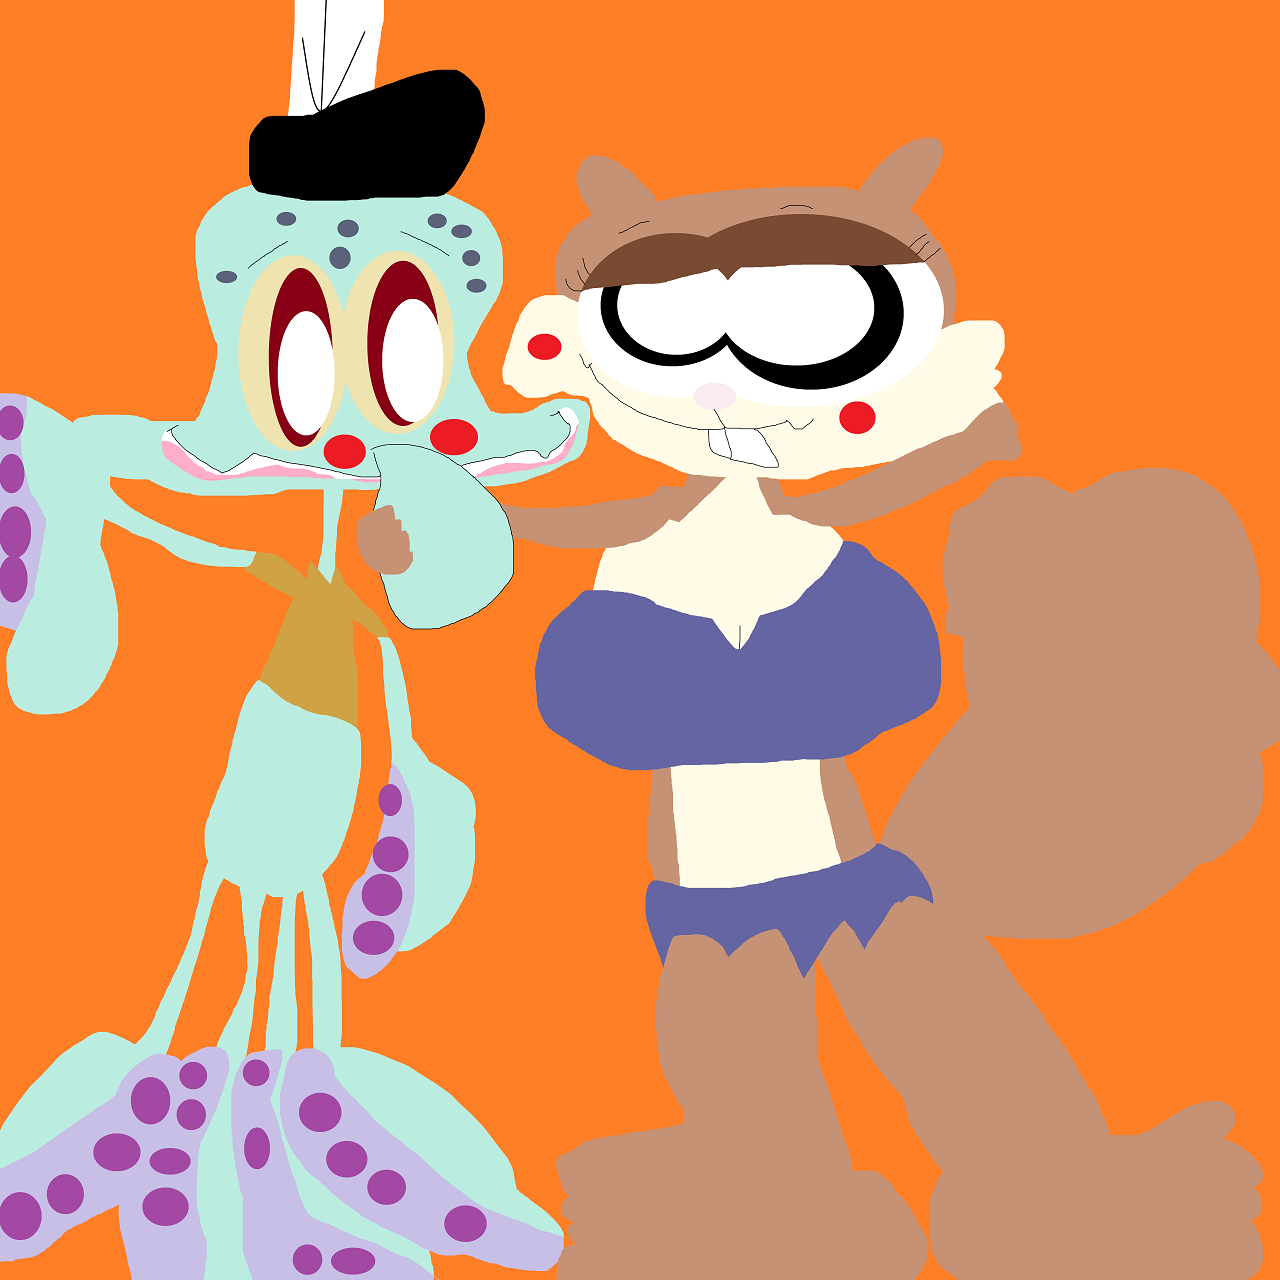 Squidward About To Be Smooched By Sandy by Falconlobo